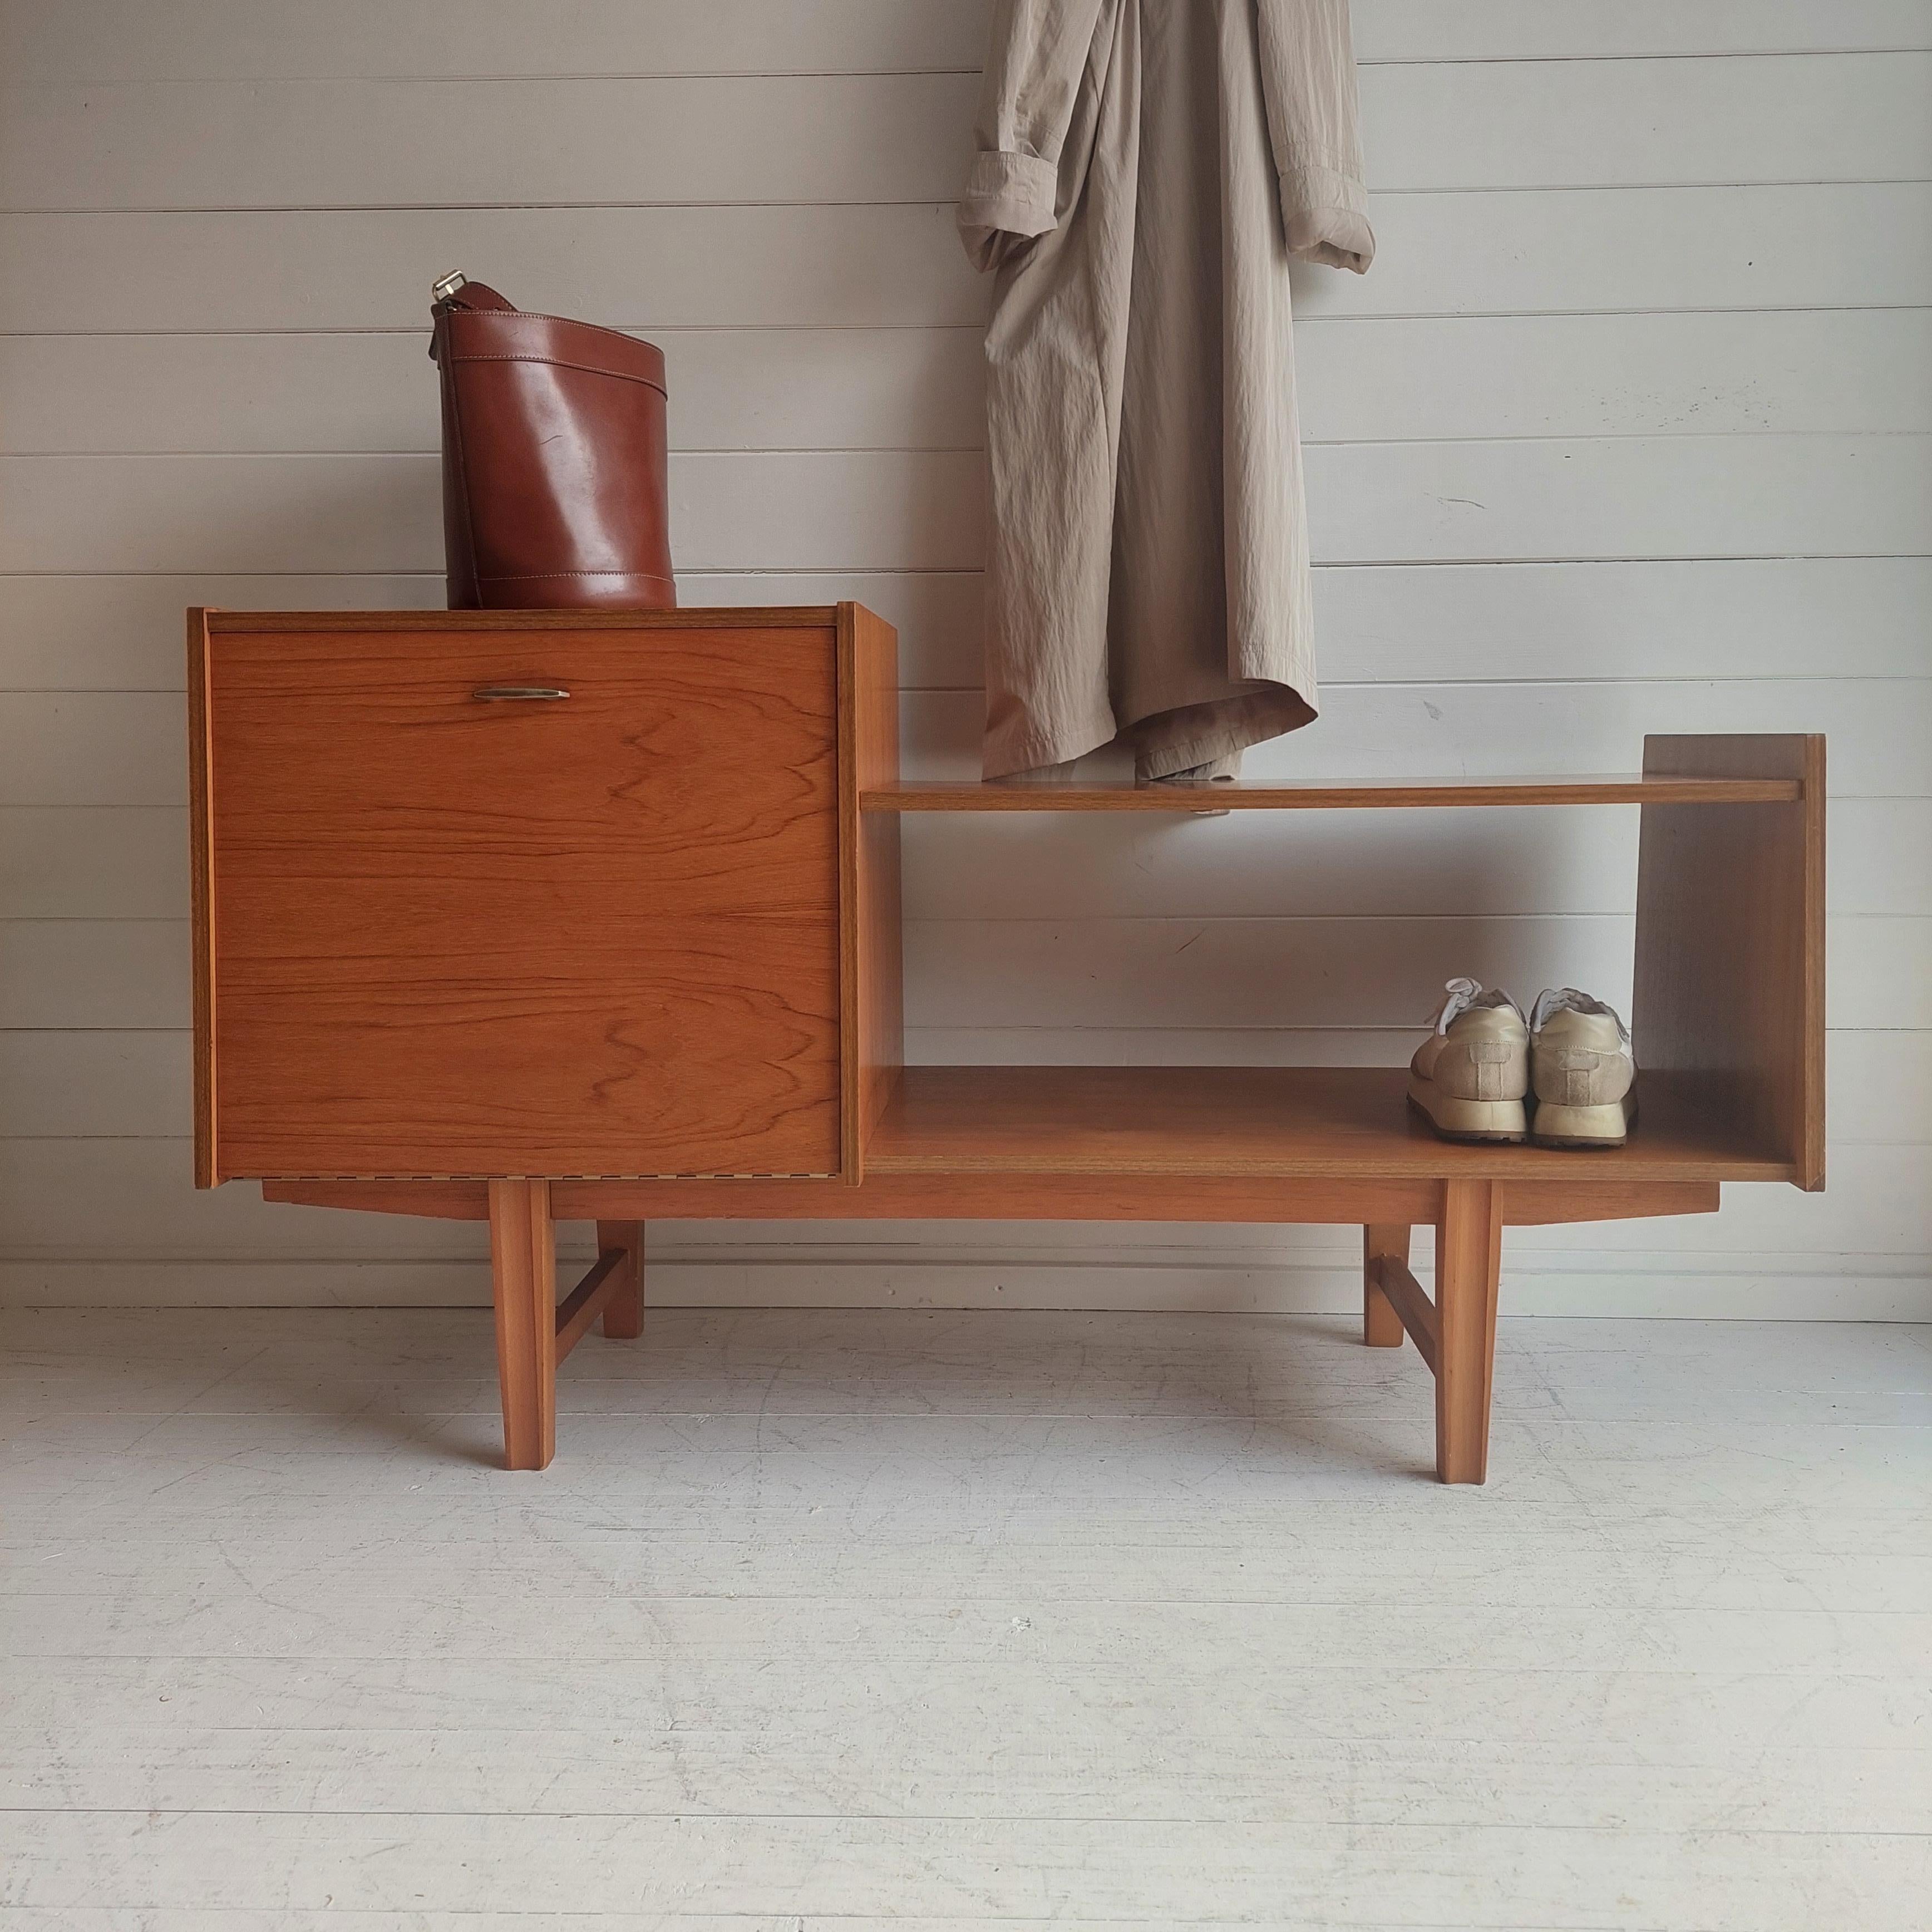 This superb sideboard / cabinet/ Hall unit has a real ‘minimalist’ feel to it.
A brithis piece of the 60s

Consisting of a pull down cupboard with brass handle ( with single shelf inside) and a lower shelving/seating area with under shelf
The